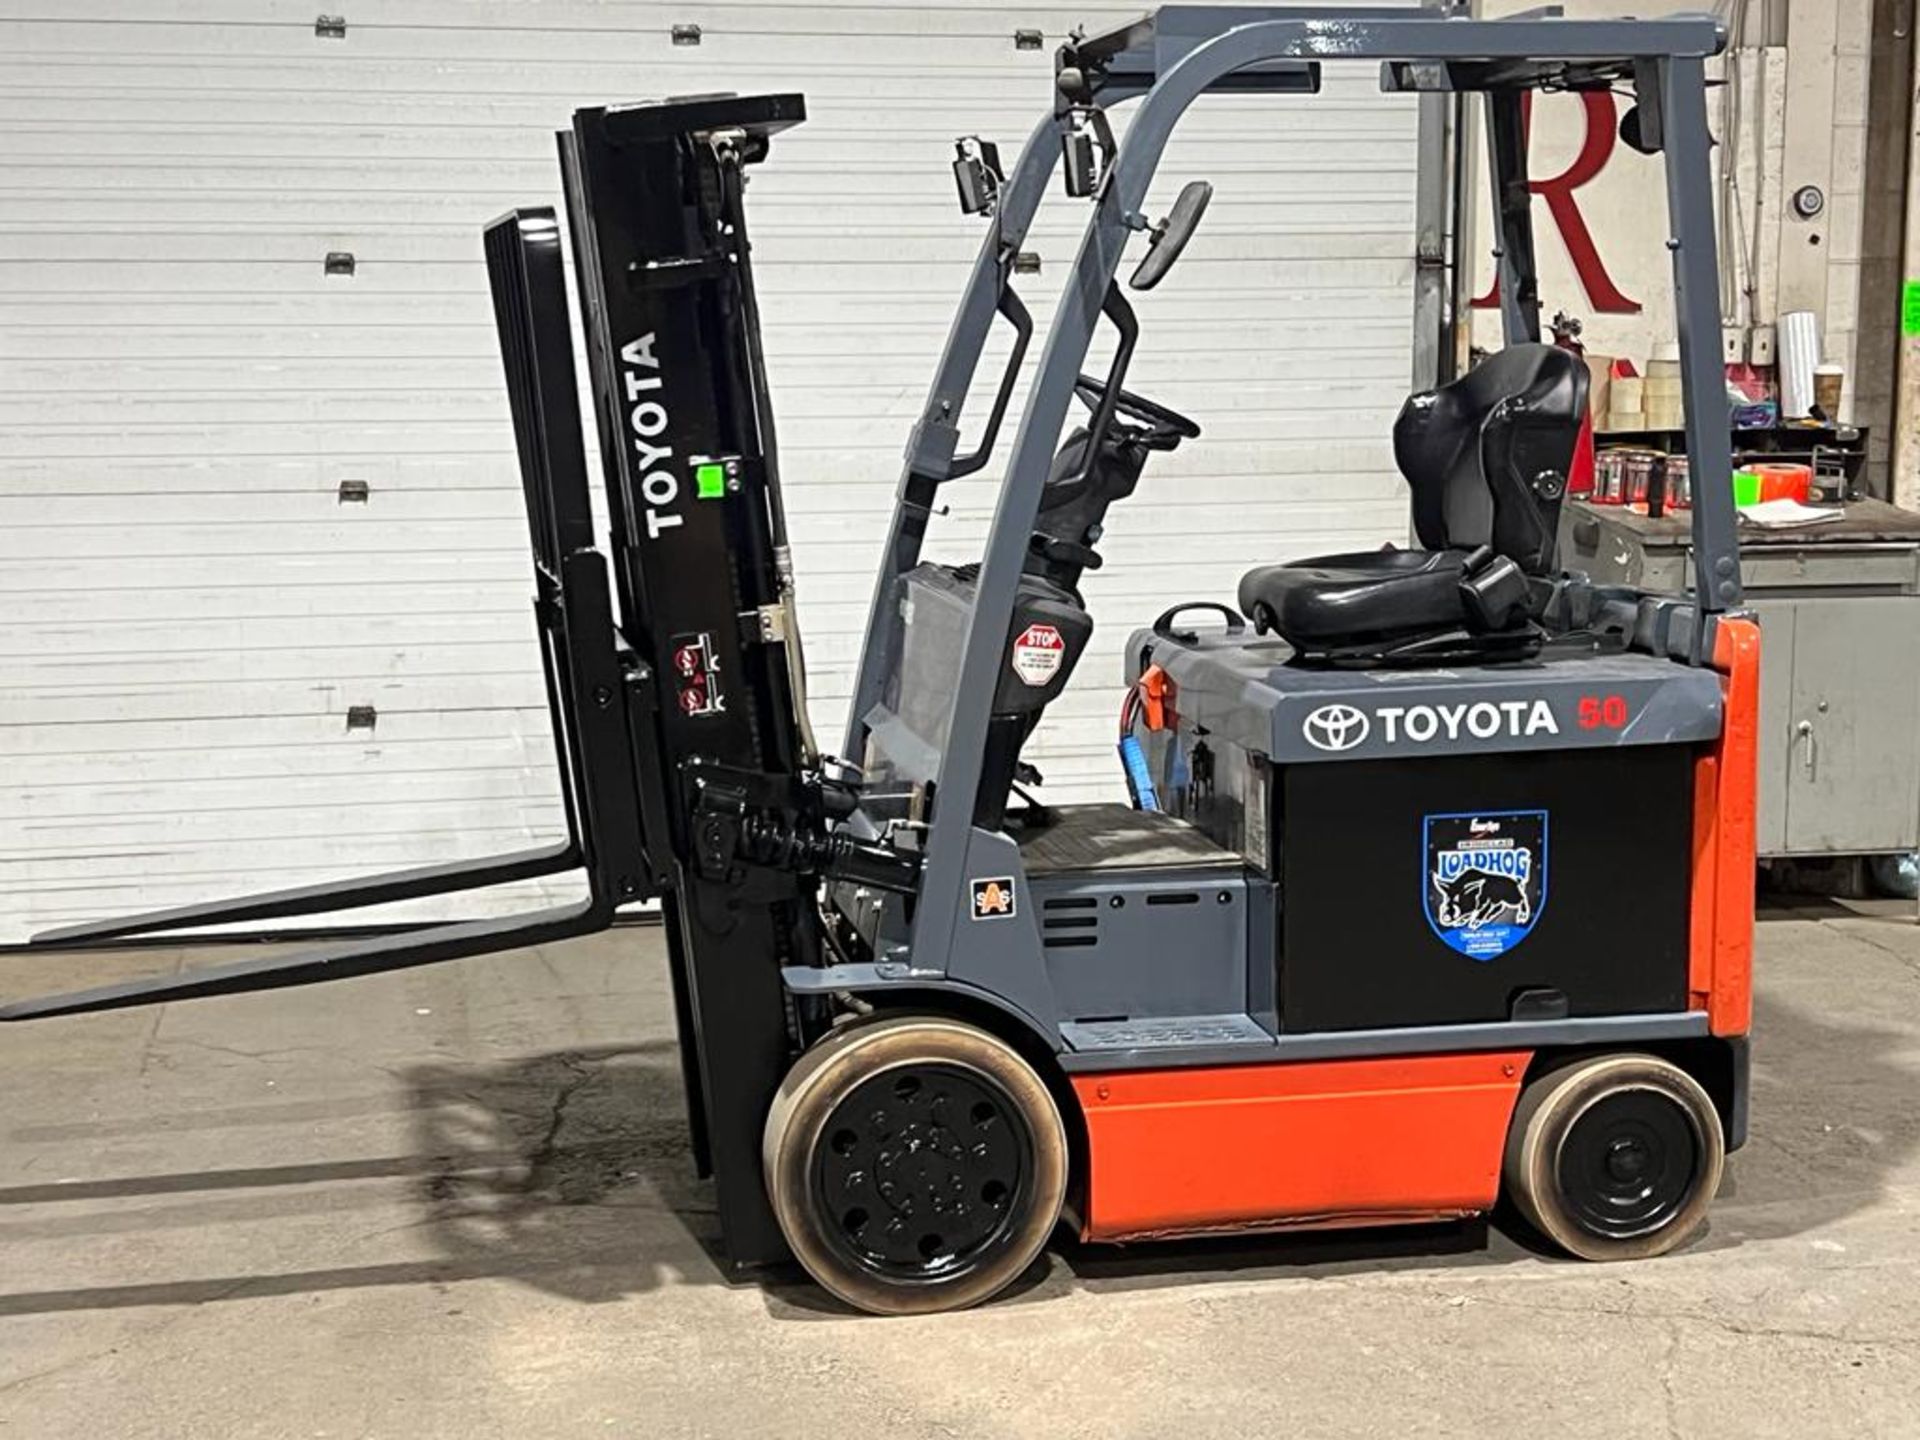 2014 Toyota 5,000lbs Capacity Electric Forklift with sideshift and 3-STAGE MAST - FREE CUSTOMS